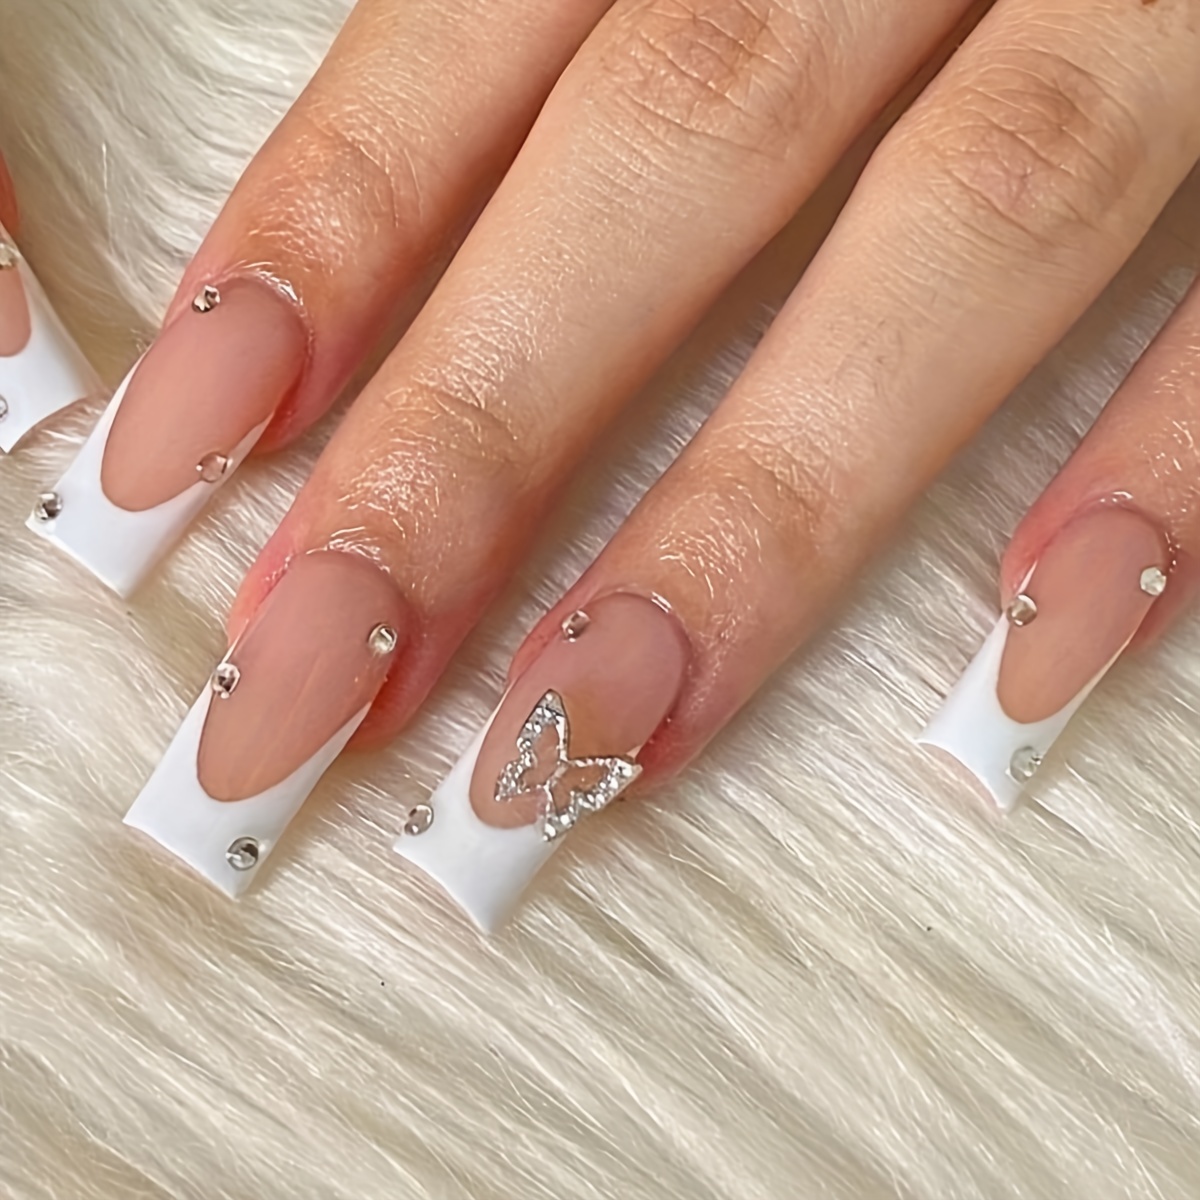 Nude French Tip Nails| French Tip Nail Inspo| Classic French Tip Nails|  Luxury Press On Nail Set – Beauty Lux Nails